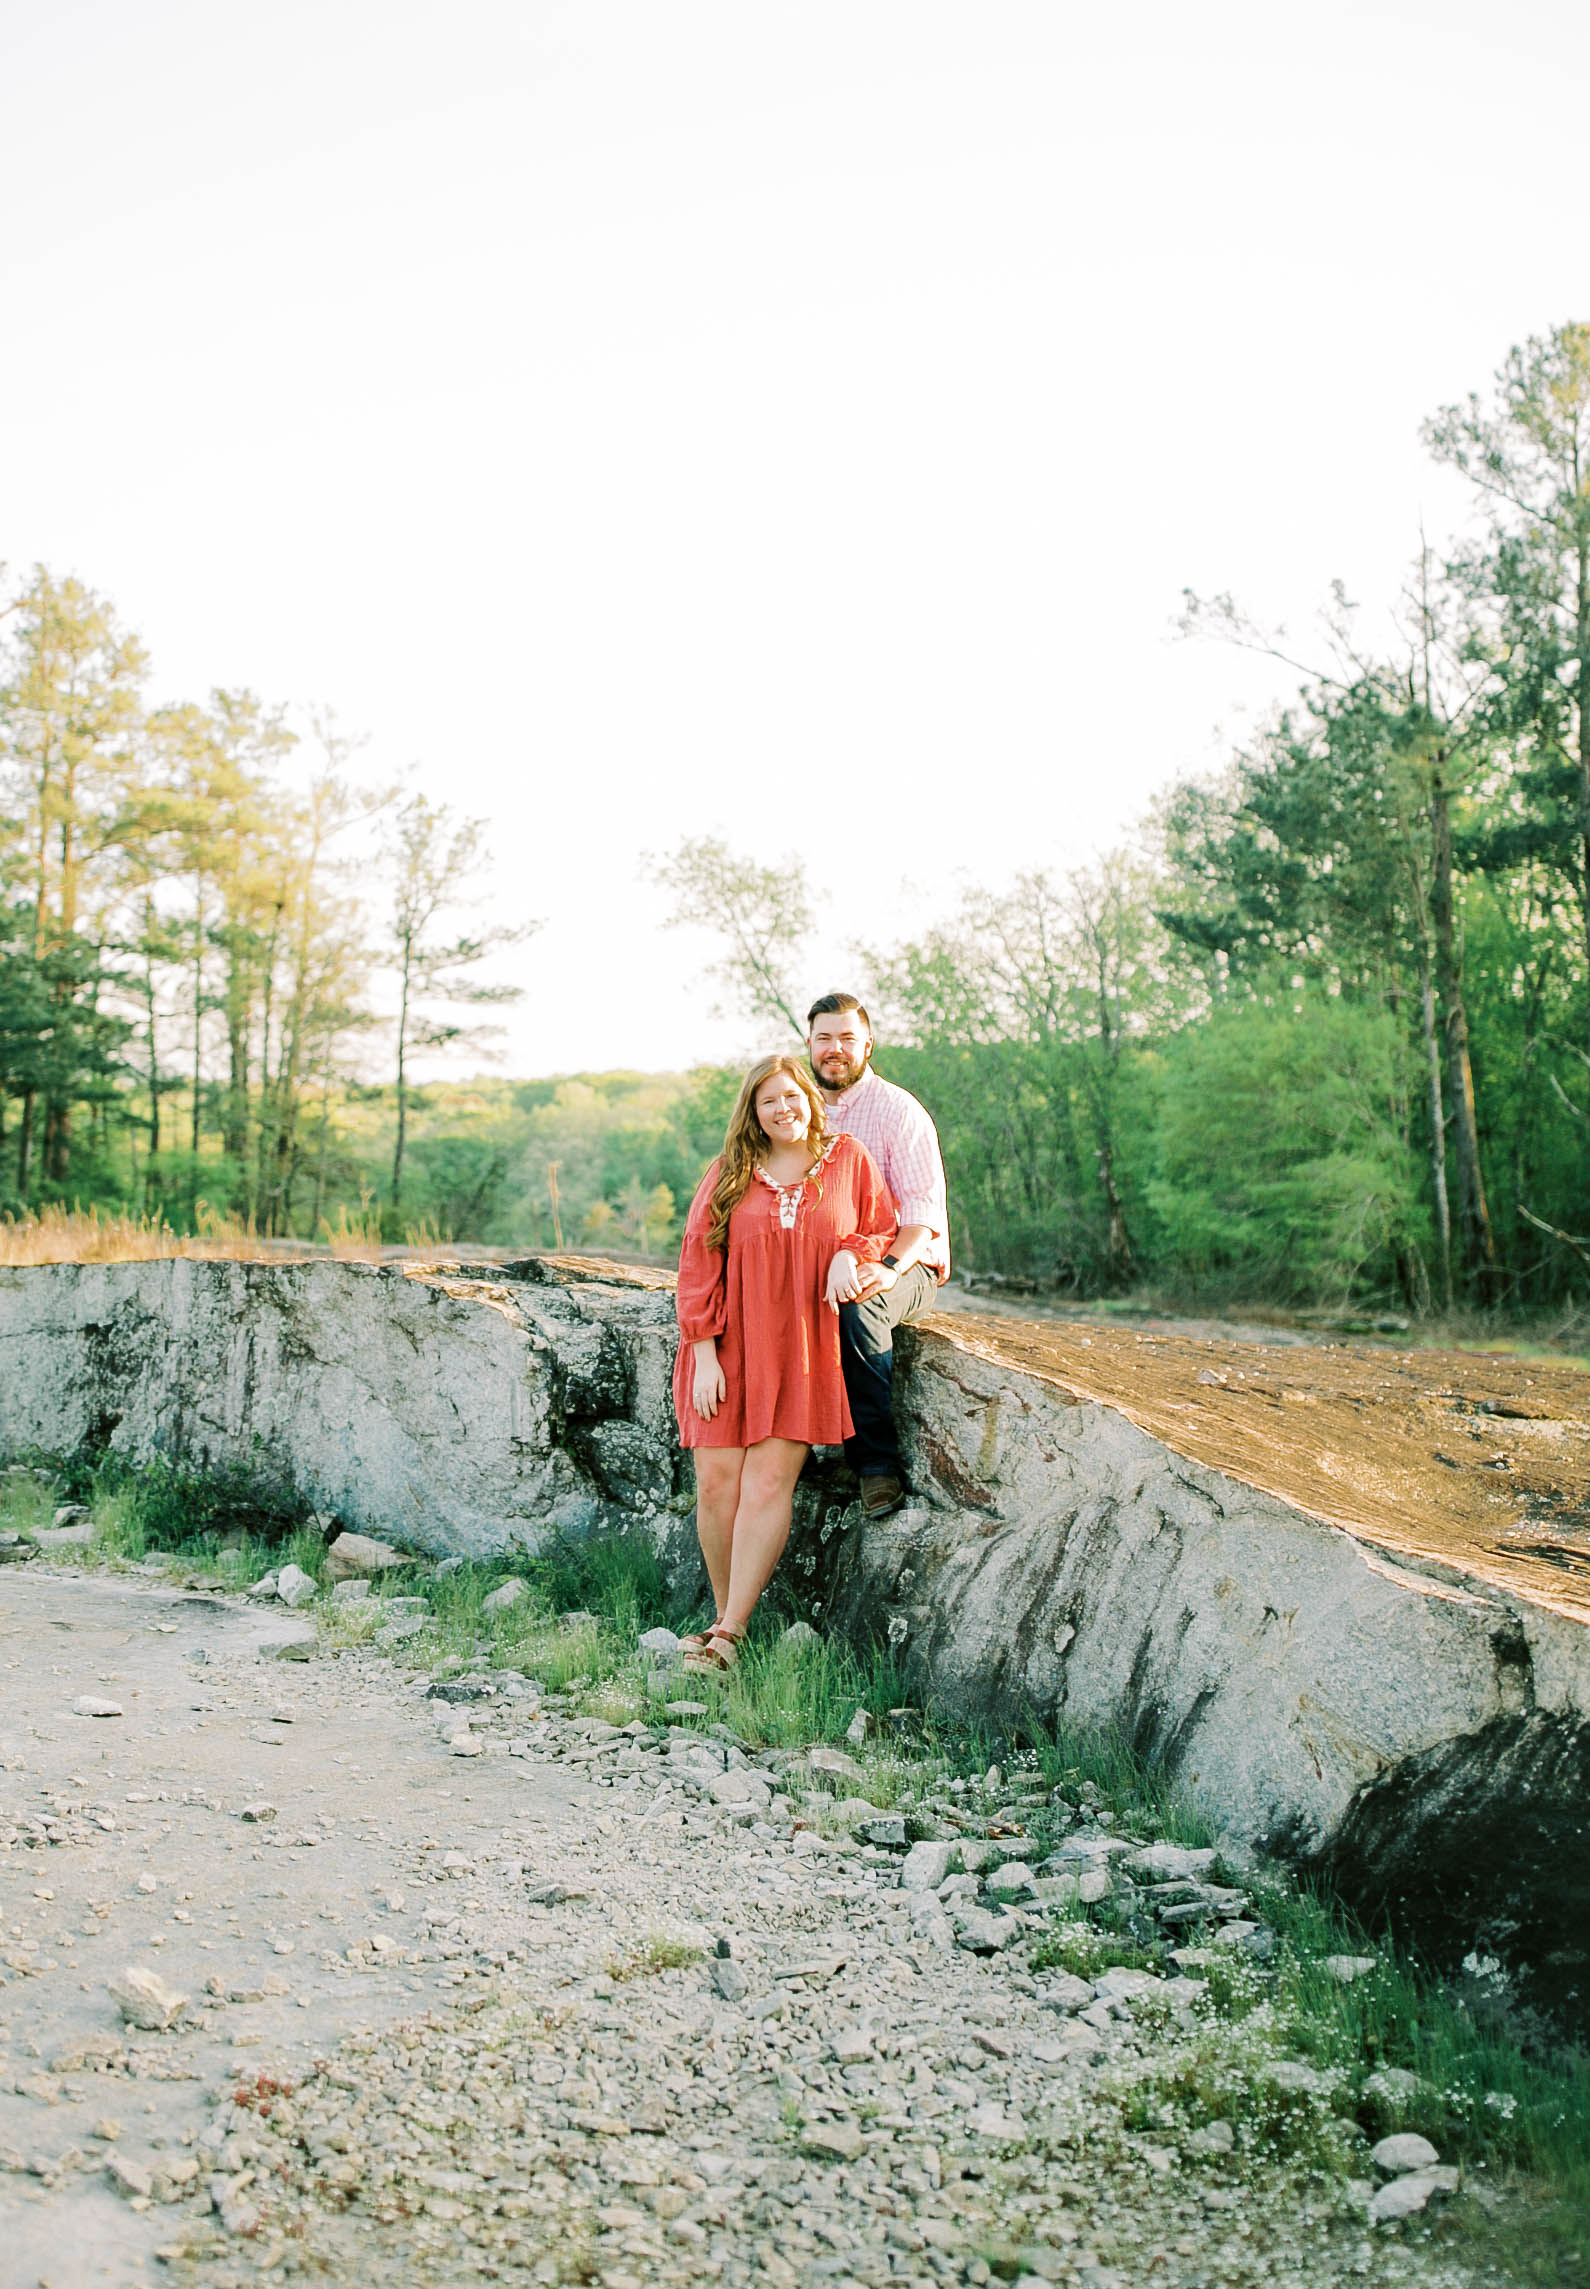 Arabia Mountain Engagement Session by Alicia Caitlyn Photography